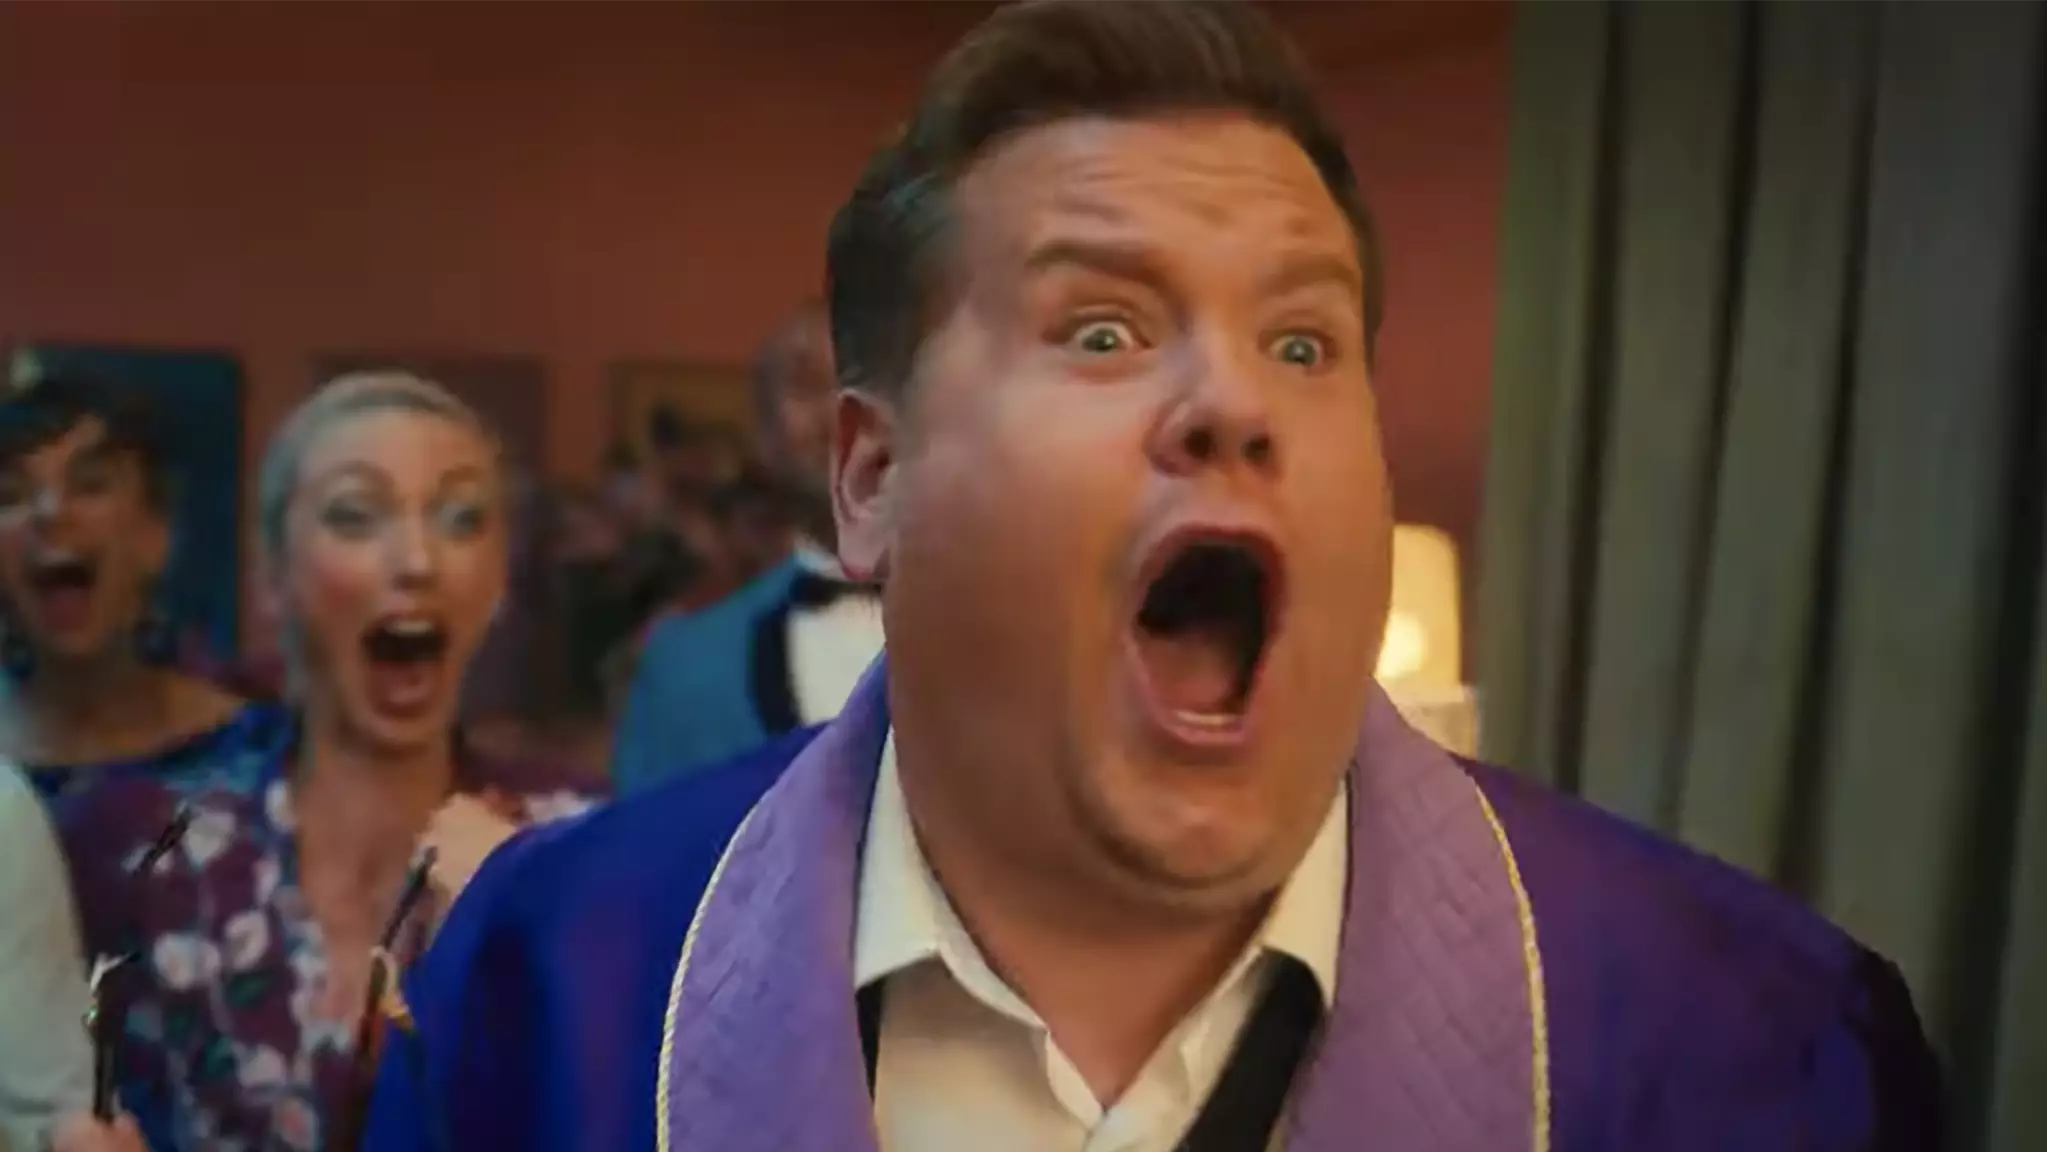 James Corden’s Performance As Gay Man In Netflix’s The Prom Labelled ‘Horrifically Bad’ By Viewers